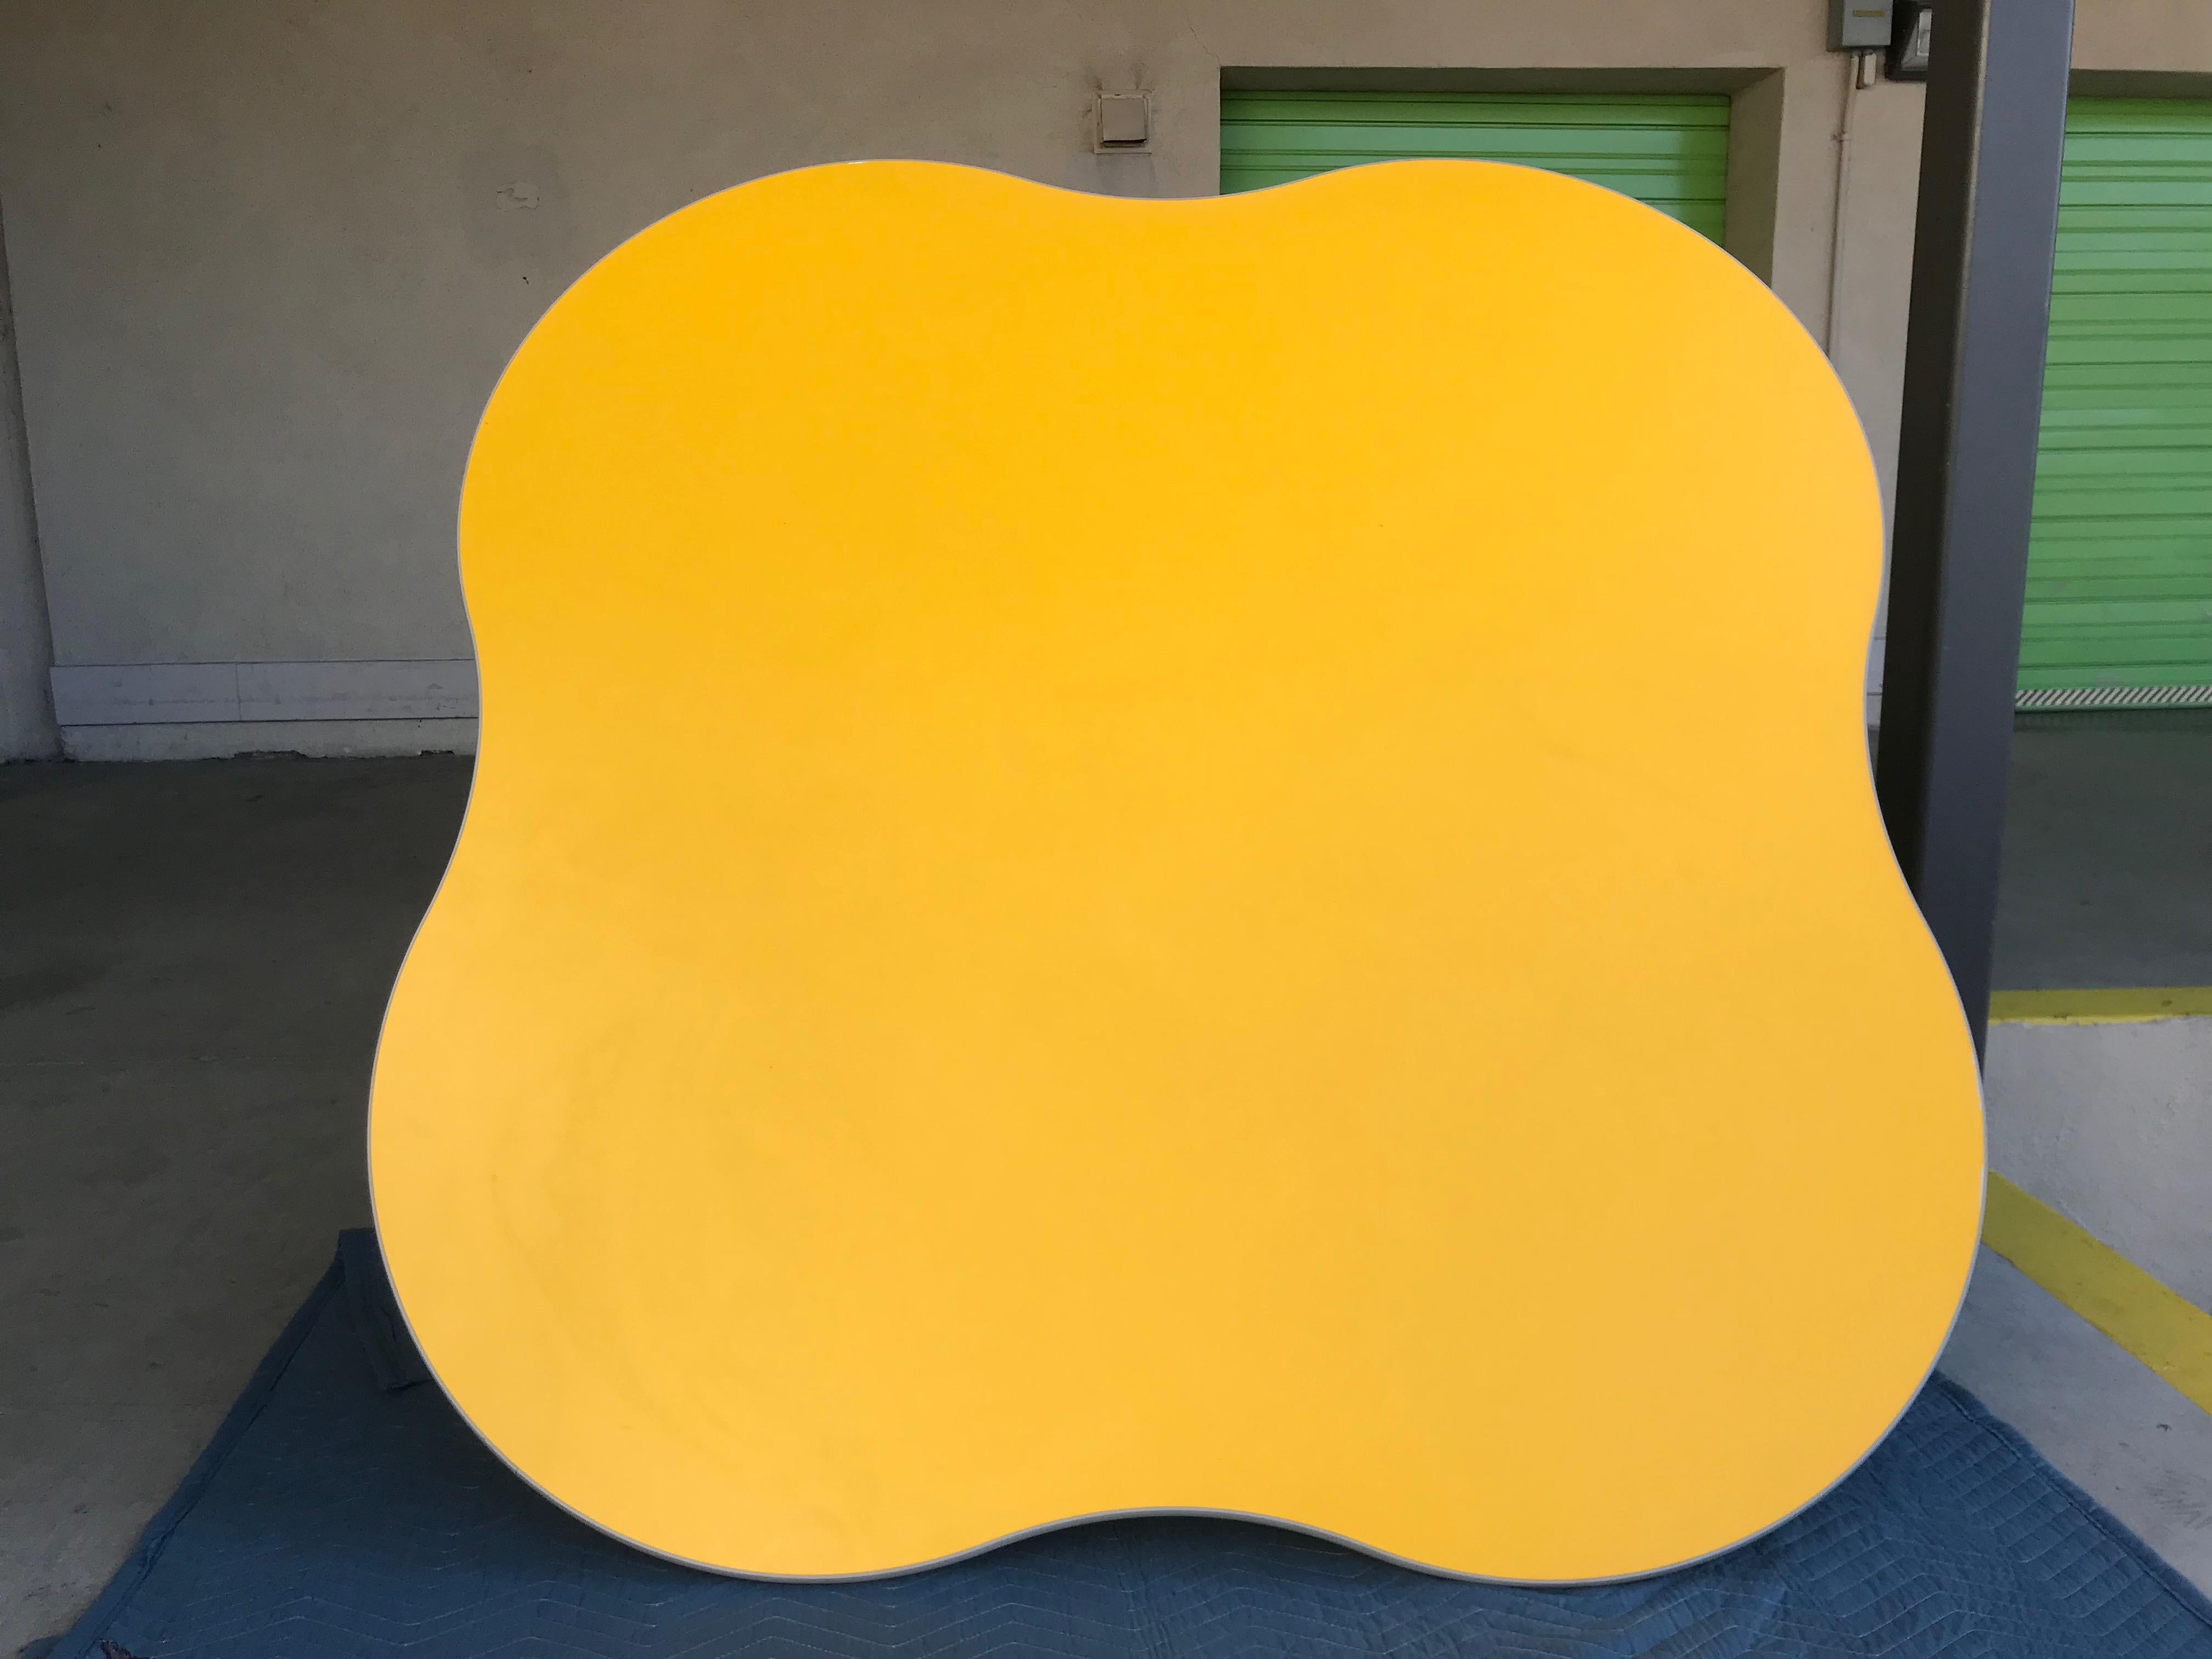 Fun piece of furniture design.
Bright whimsical lemon yellow laminate top with grey rubber trim, galvanized steel legs.
Original vintage condition with minor wear and patina, barely visible scratch on the top with minor scuffs on the base.
No major